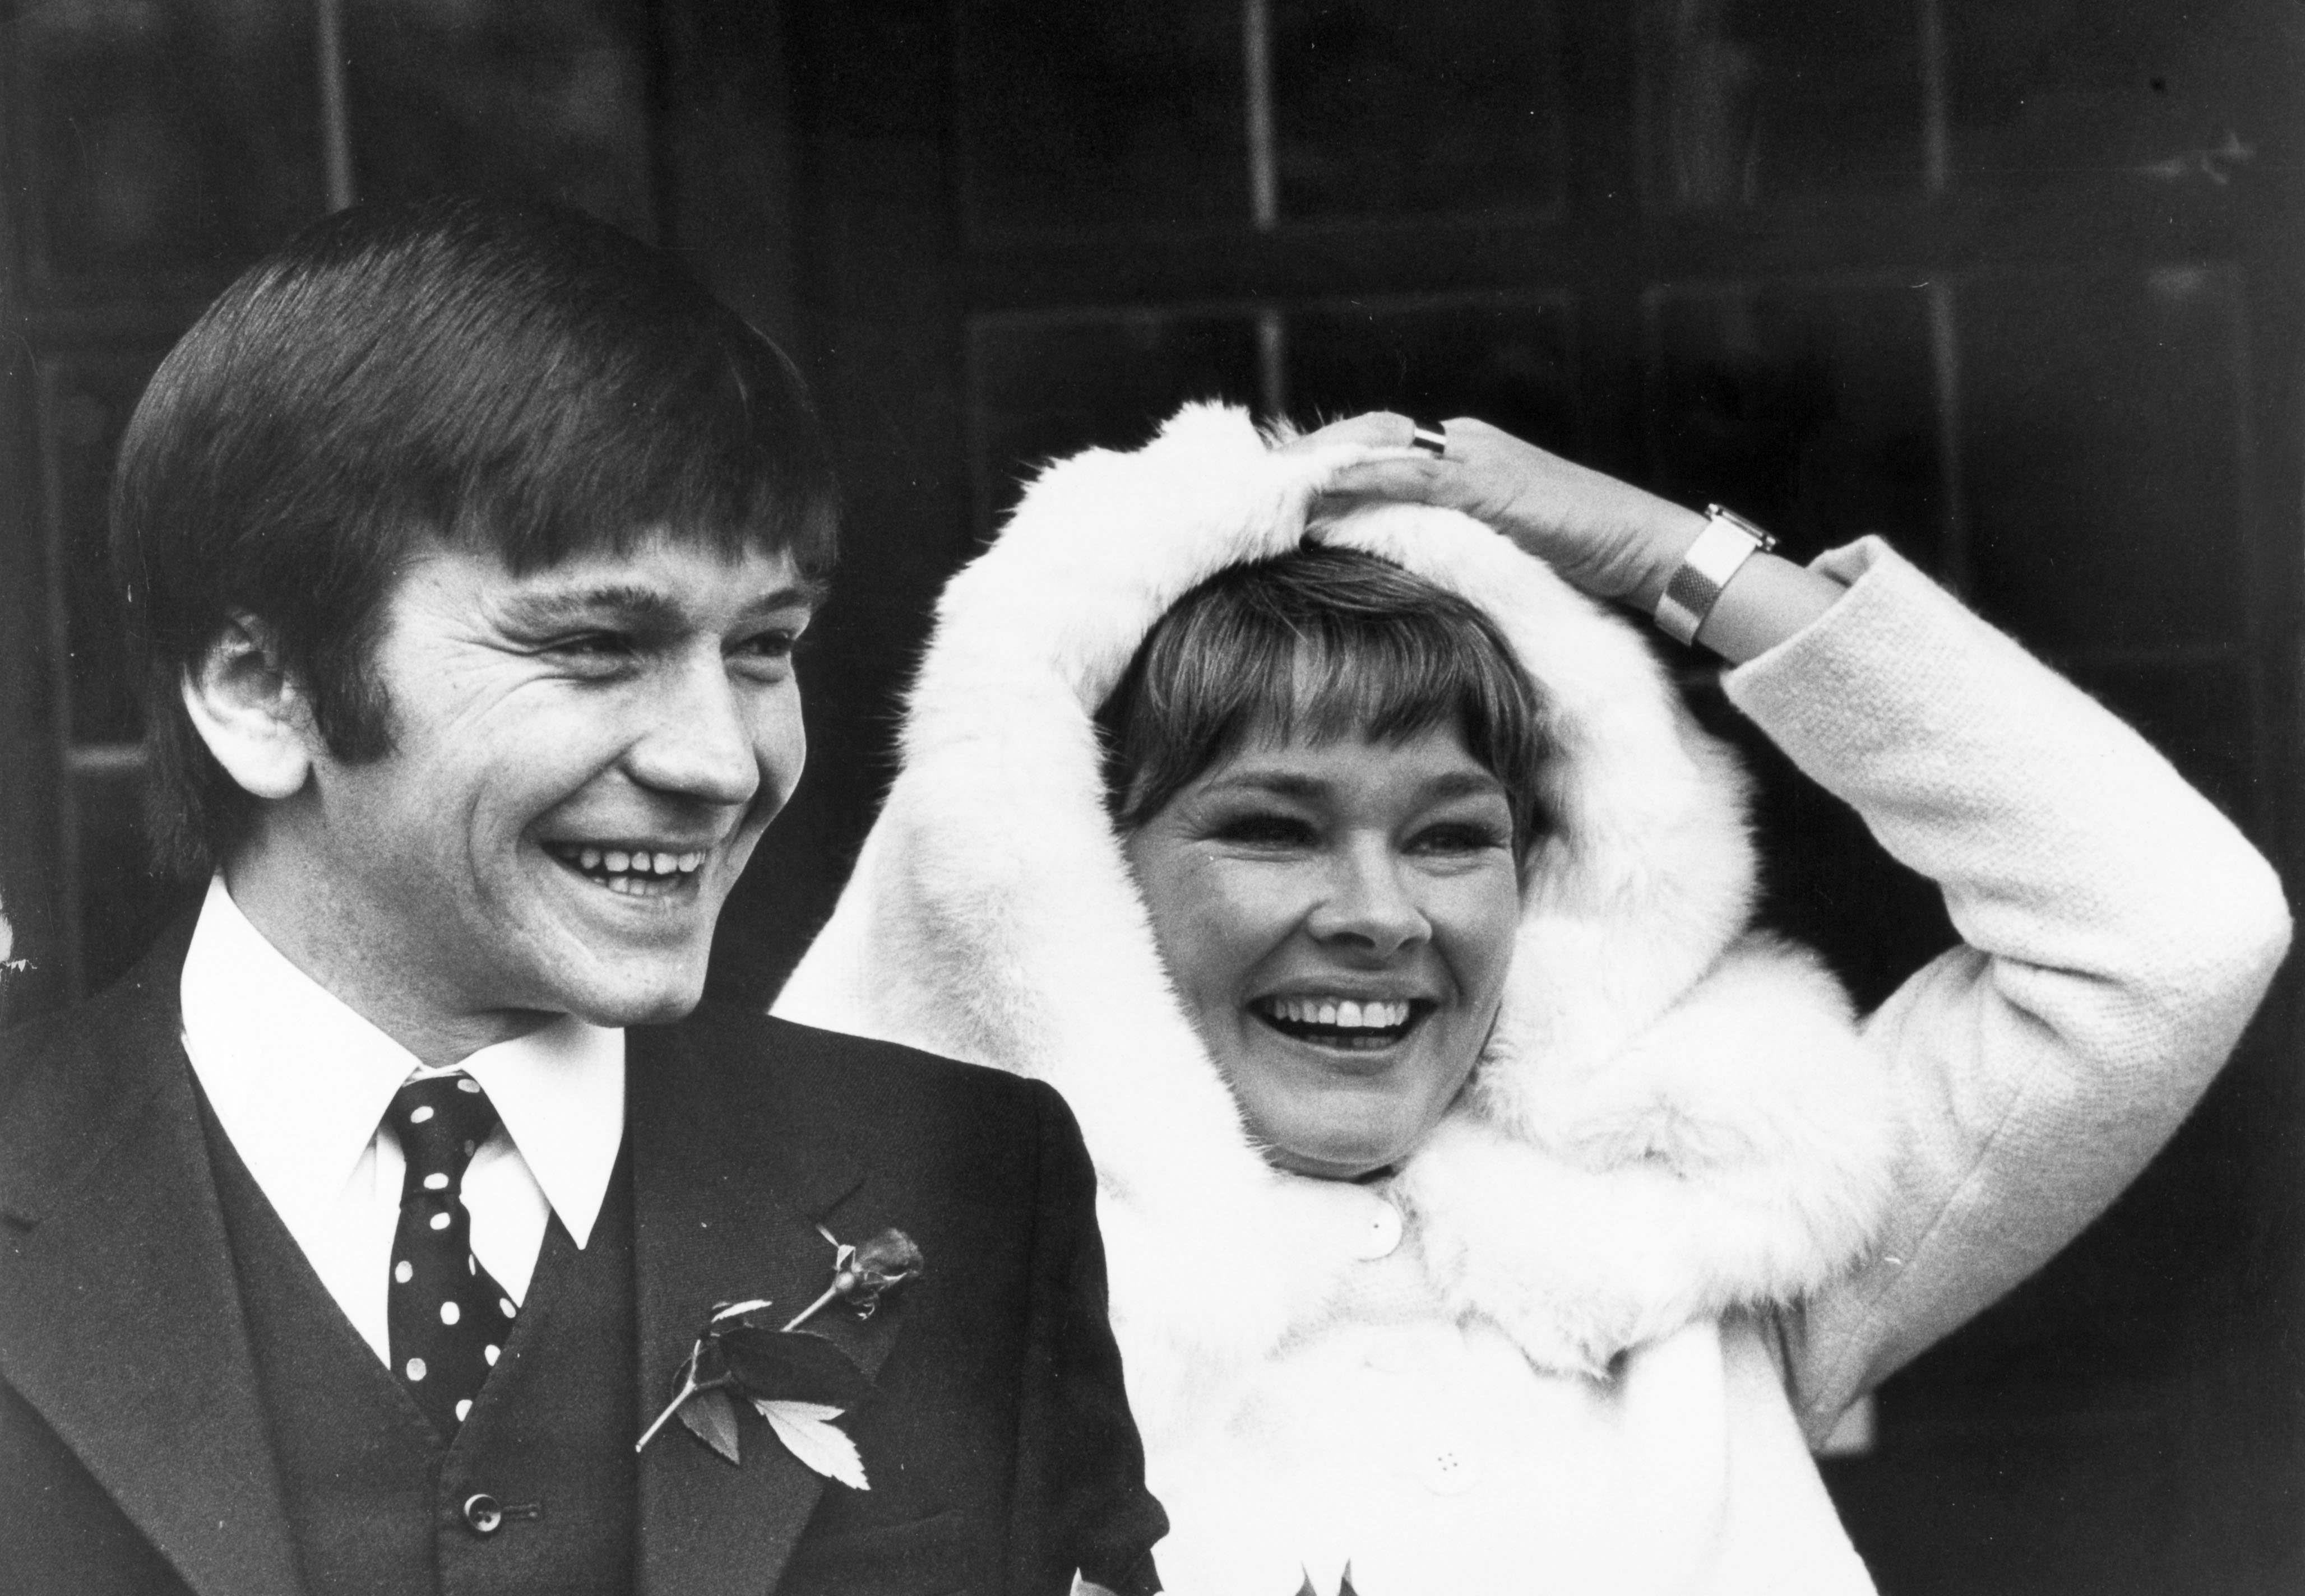 Michael Williams and Judi Dench after their wedding at St, Mary's, Hampstead on February 6, 1971 in Hampstead, London ┃Source: Getty Images